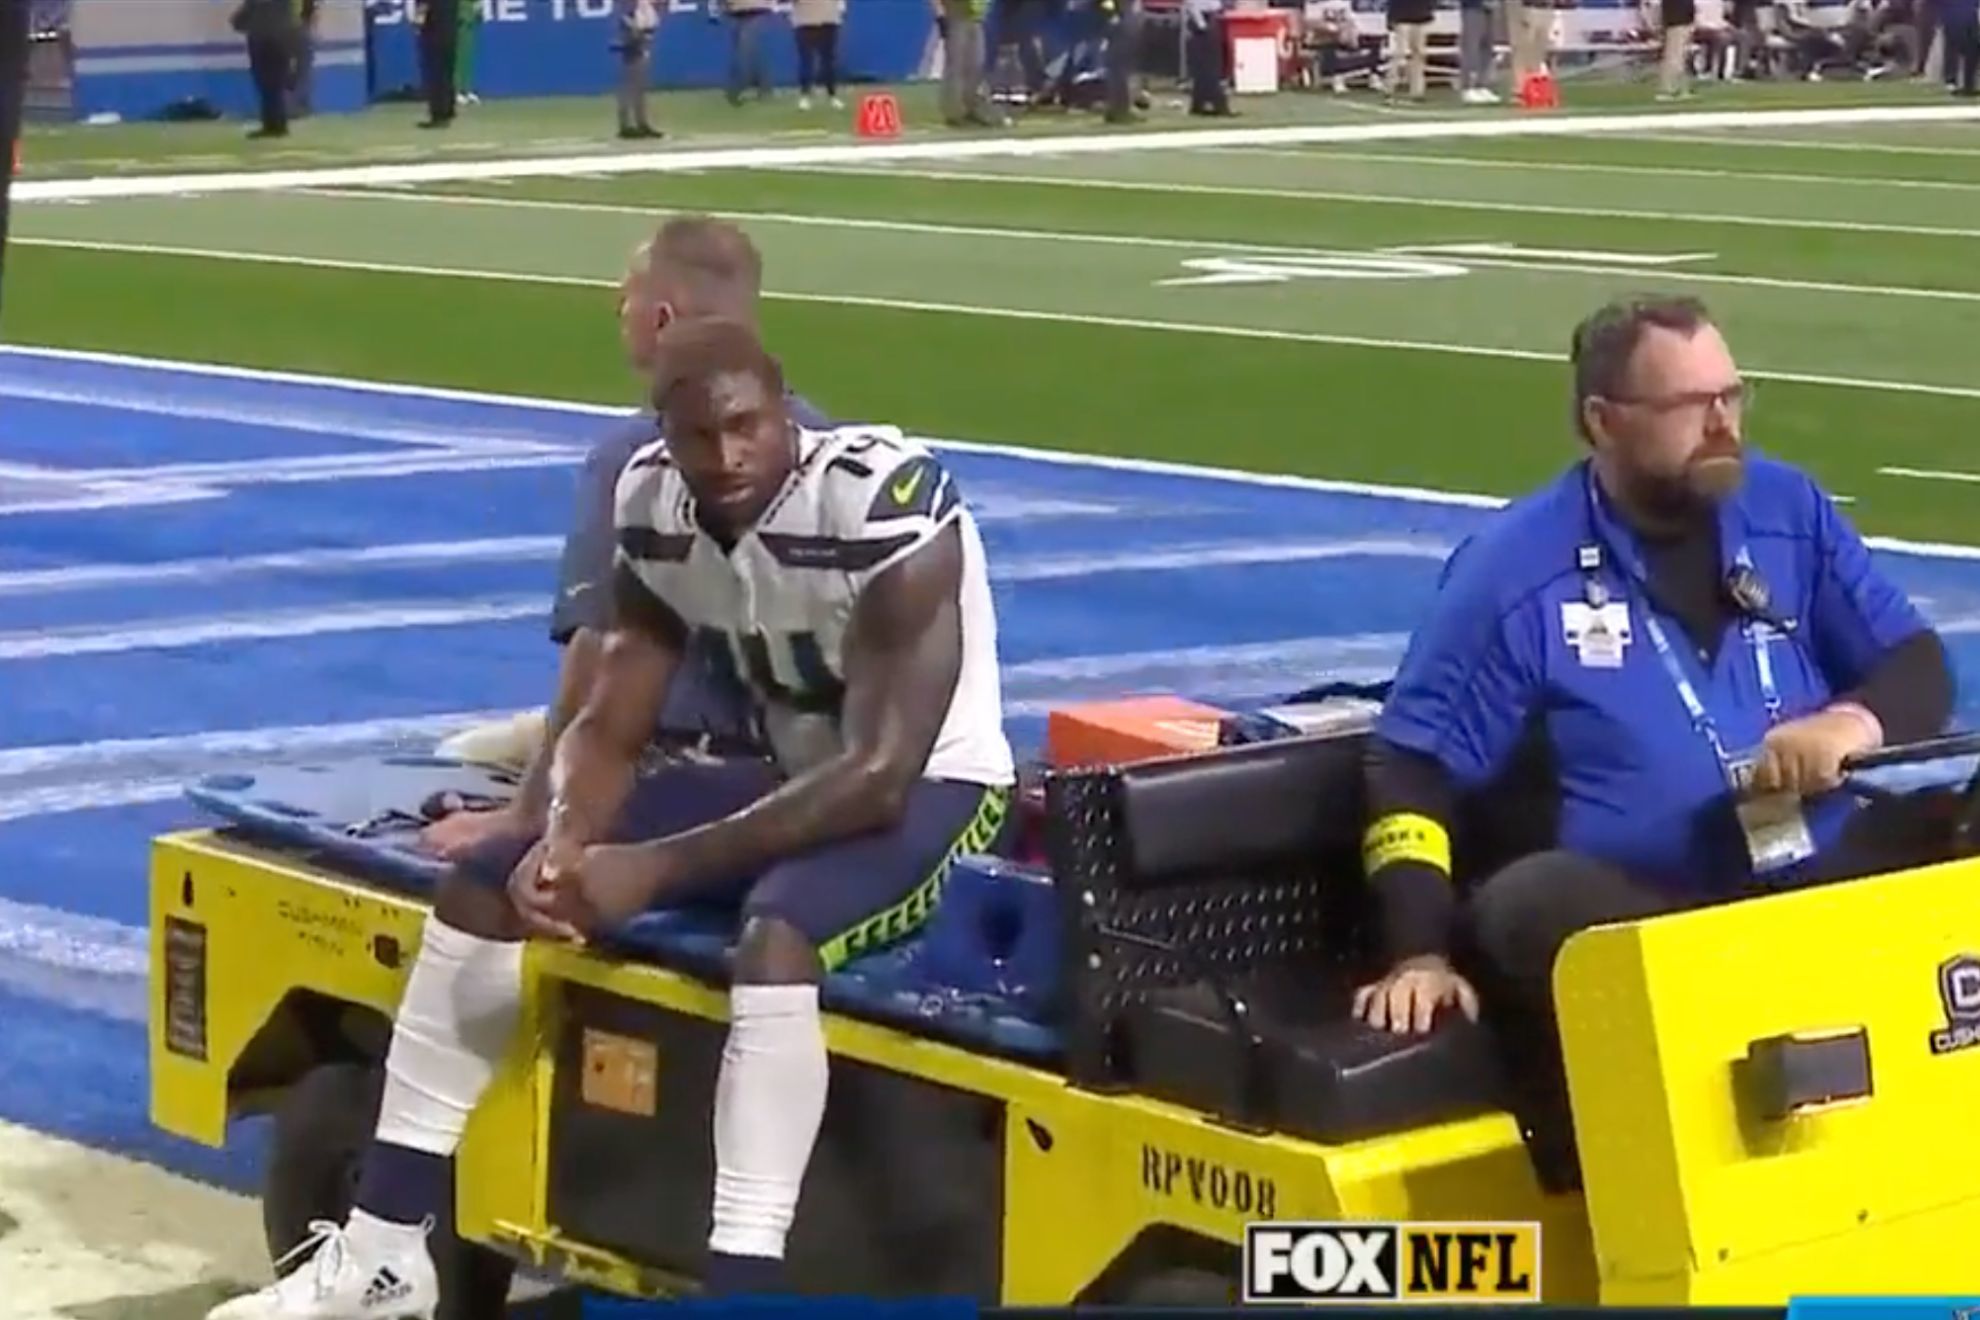 DK Metcalf put Seahawks fans into a panic when he was carted off during his team's game against the Lions. -FOX NFL